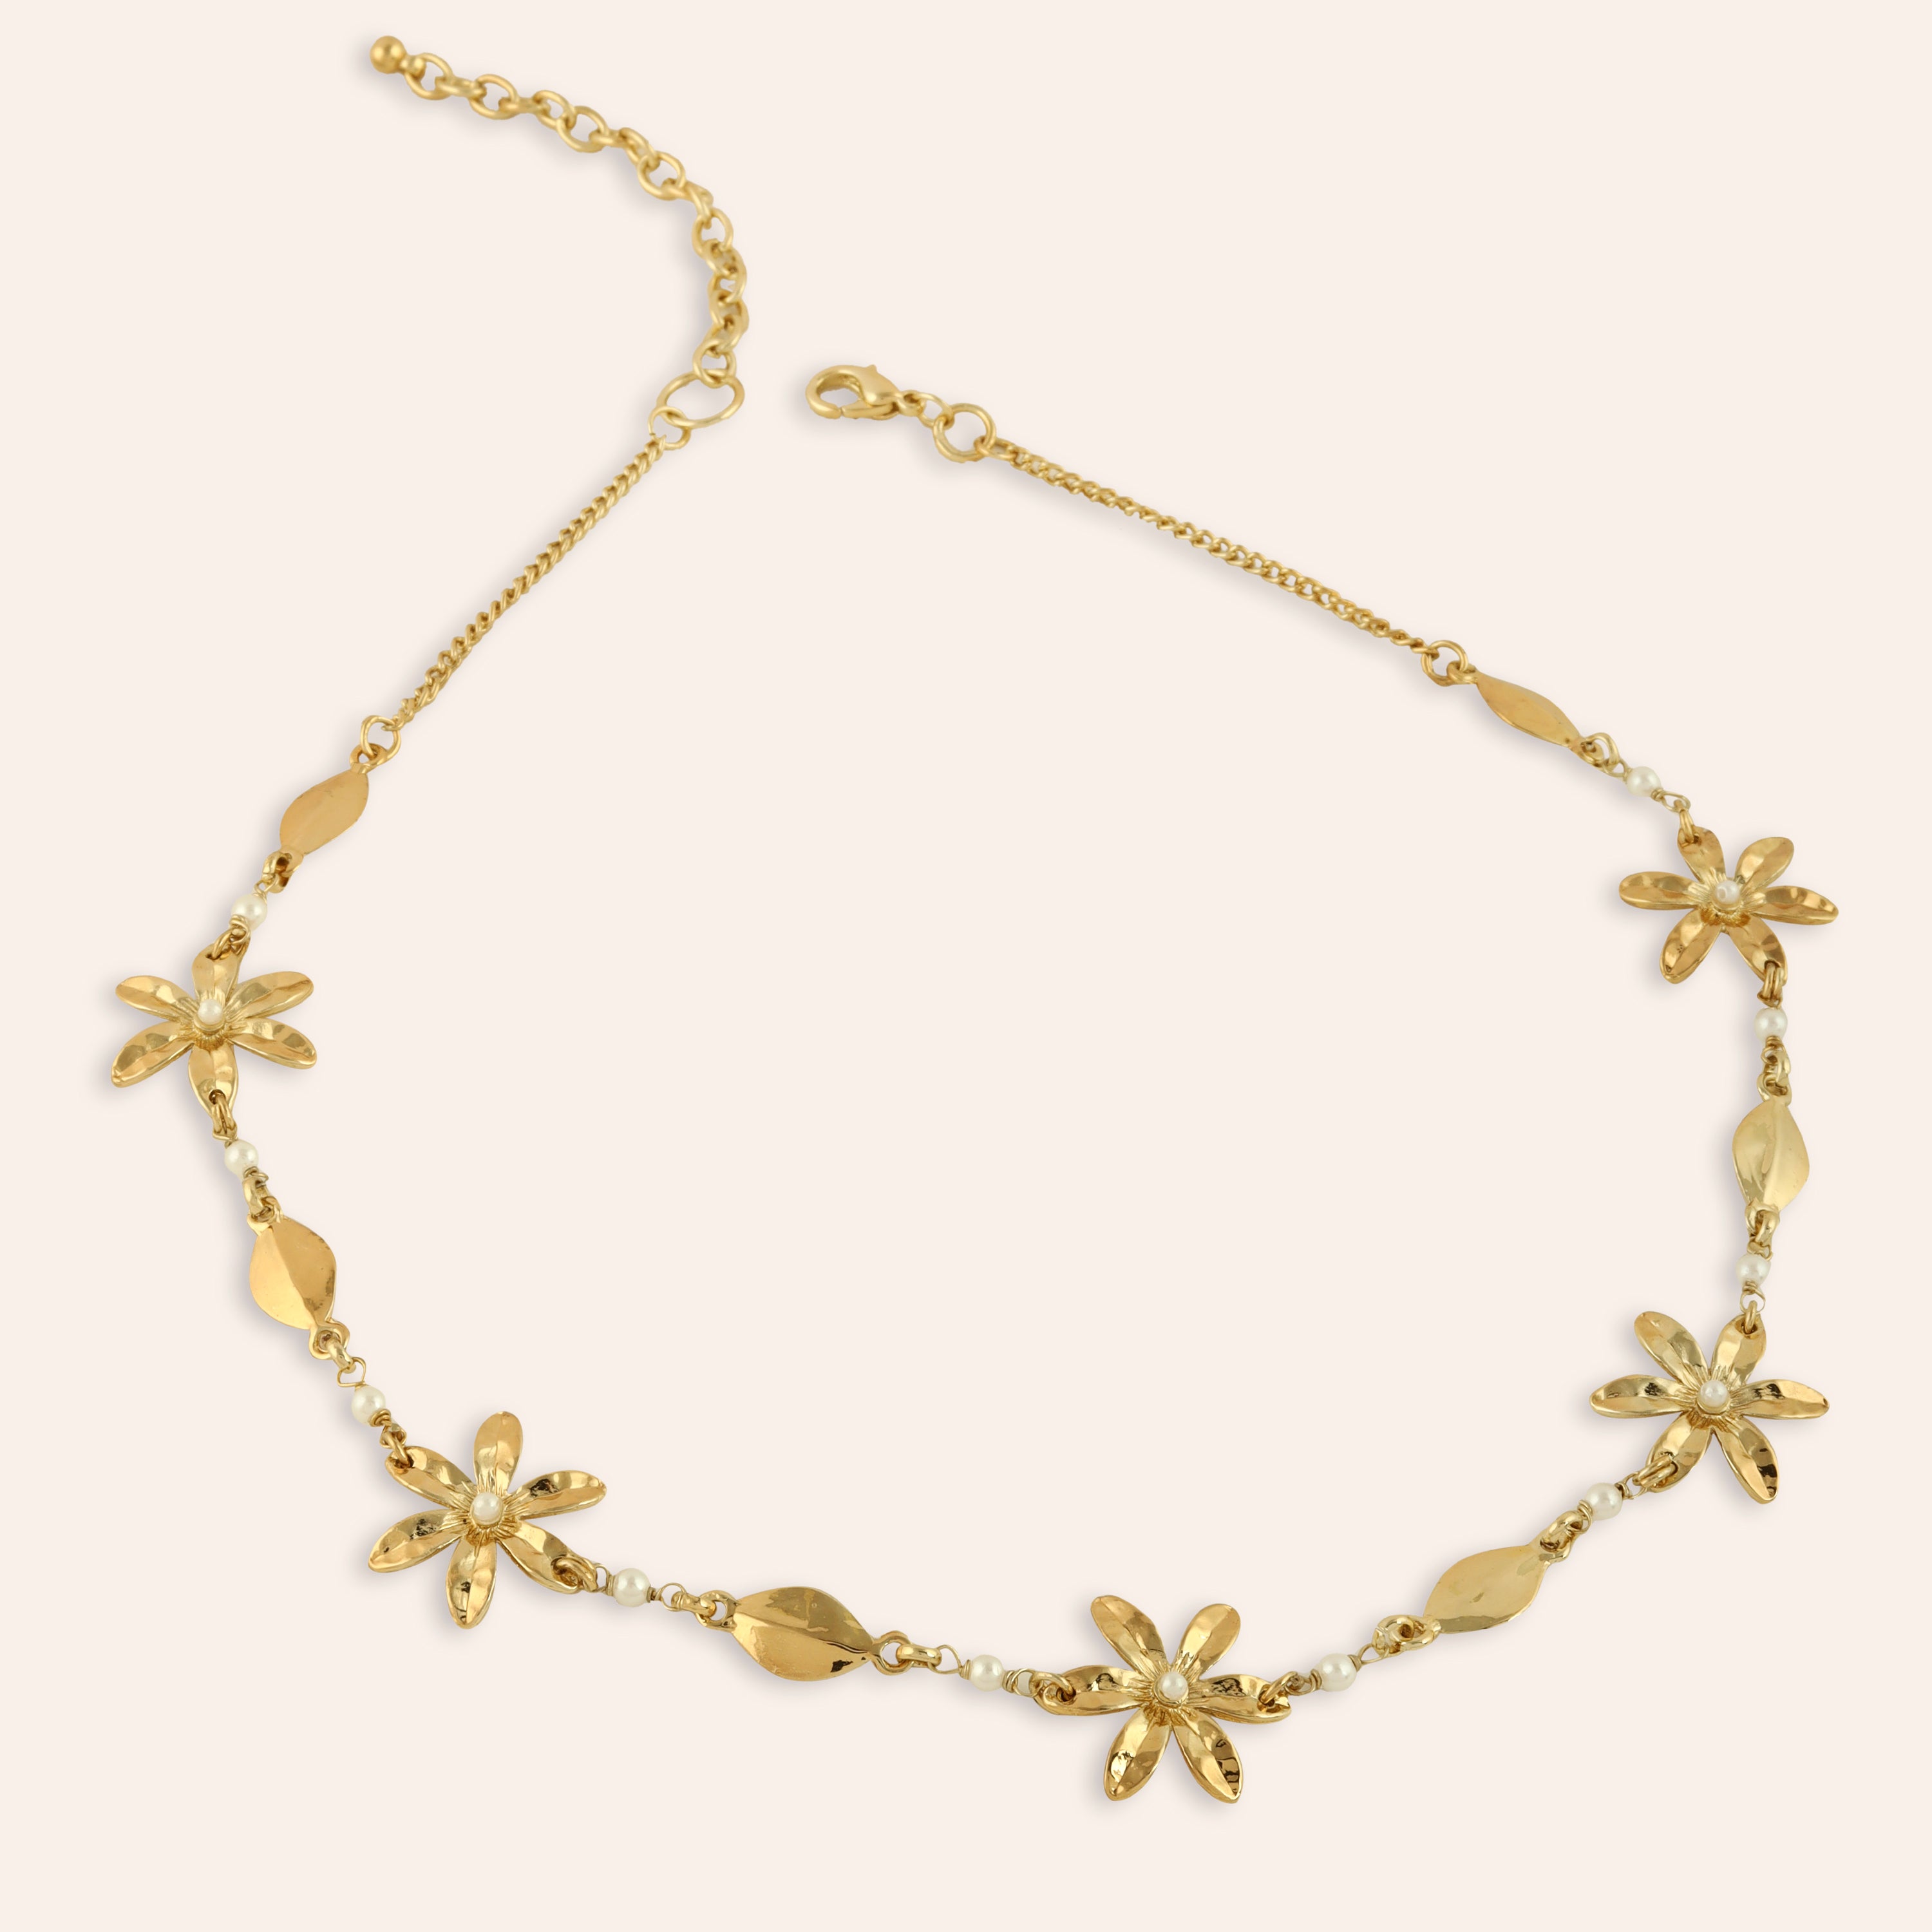 TFC Floral Gold Plated Pearl Necklace-Enhance your elegance with our collection of gold-plated necklaces for women. Choose from stunning pendant necklaces, chic choker necklaces, and trendy layered necklaces. Our sleek and dainty designs are both affordable and anti-tarnish, ensuring lasting beauty. Enjoy the cheapest fashion jewellery, lightweight and stylish- only at The Fun Company